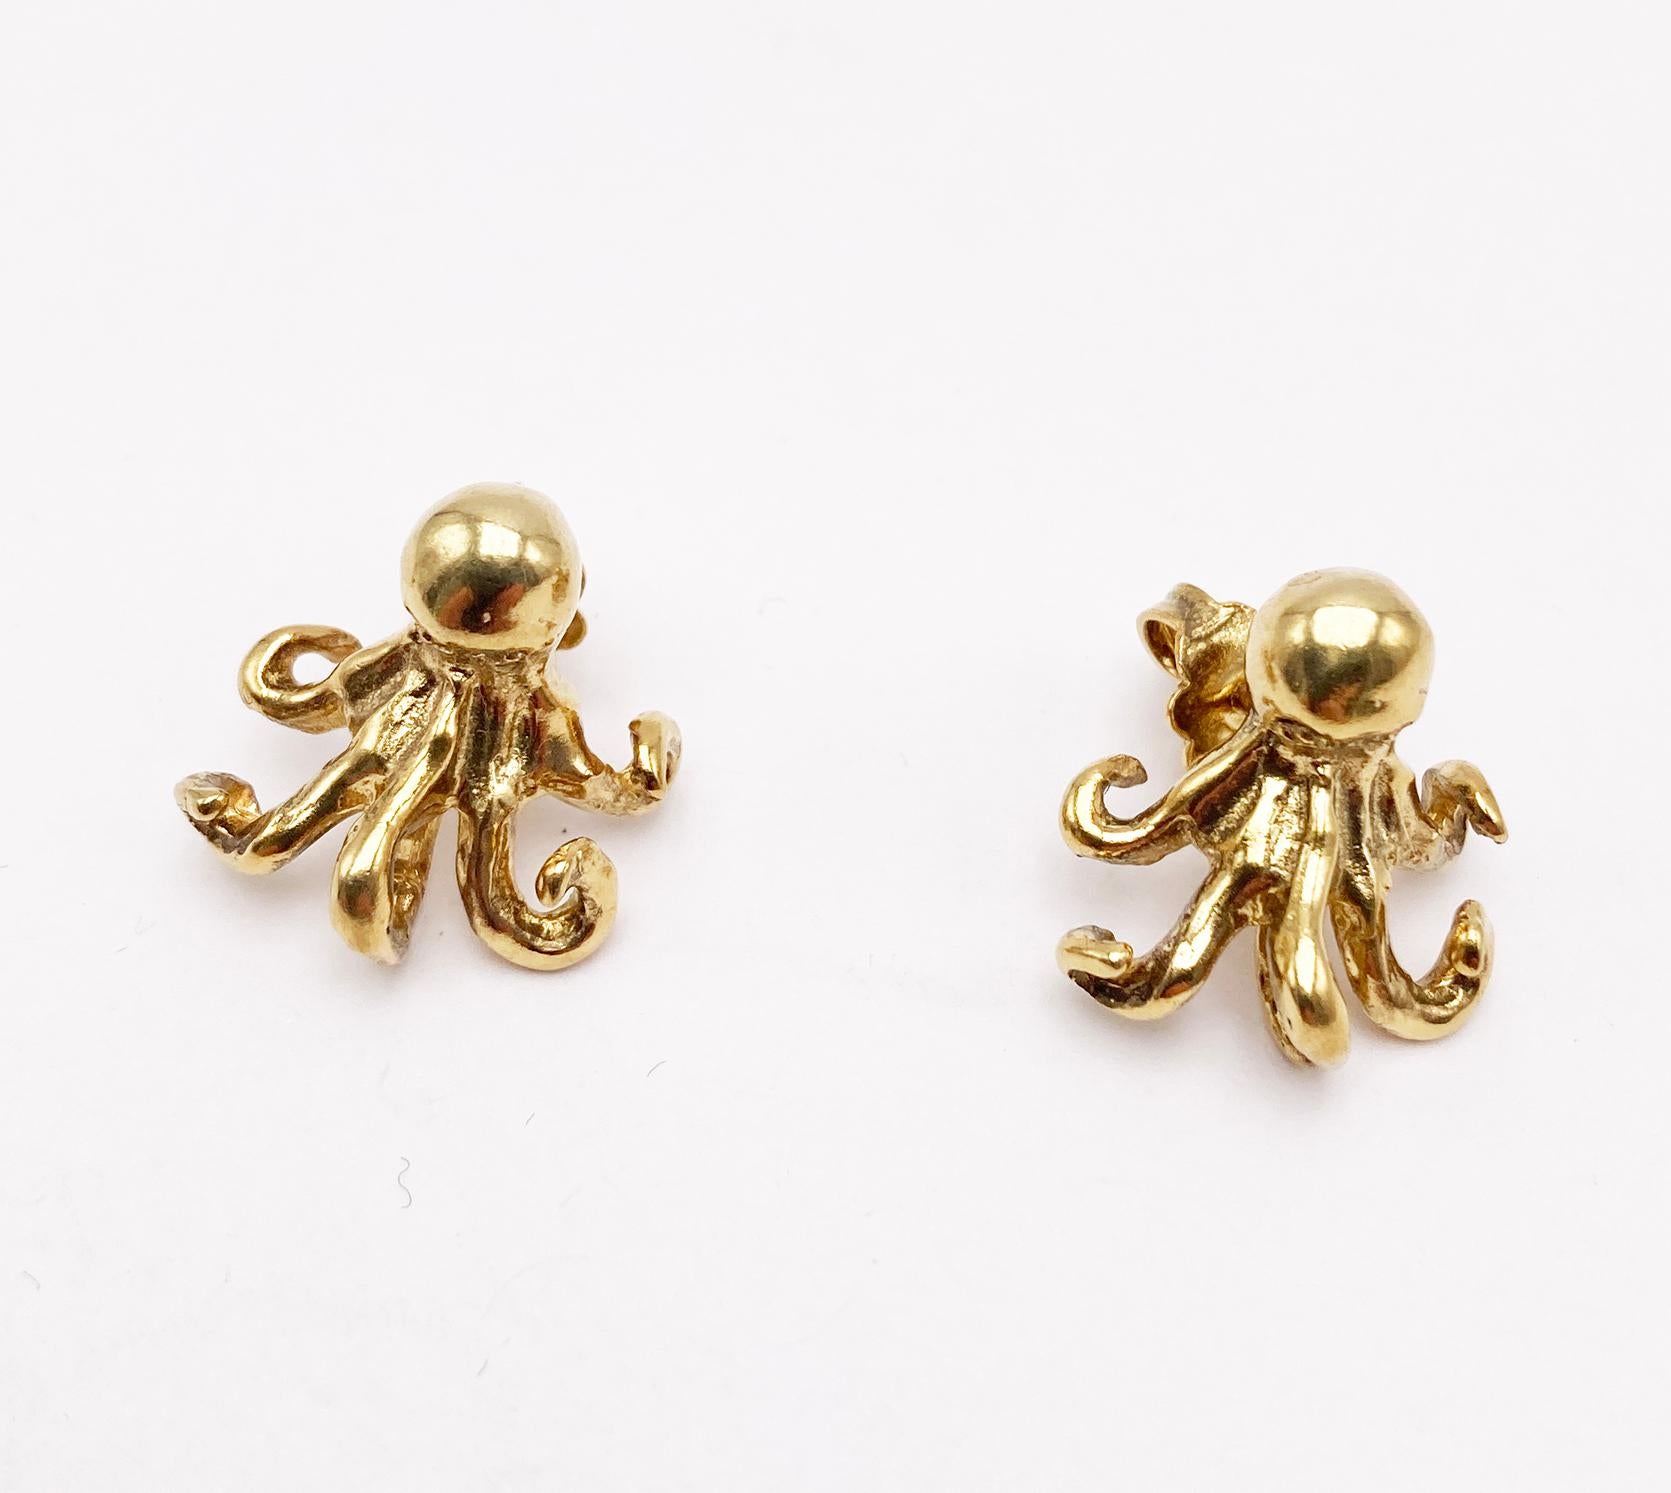 Rossella Ugolini 18K Yellow Gold Handcrafted Octopus Stud Earrings For Sale 4